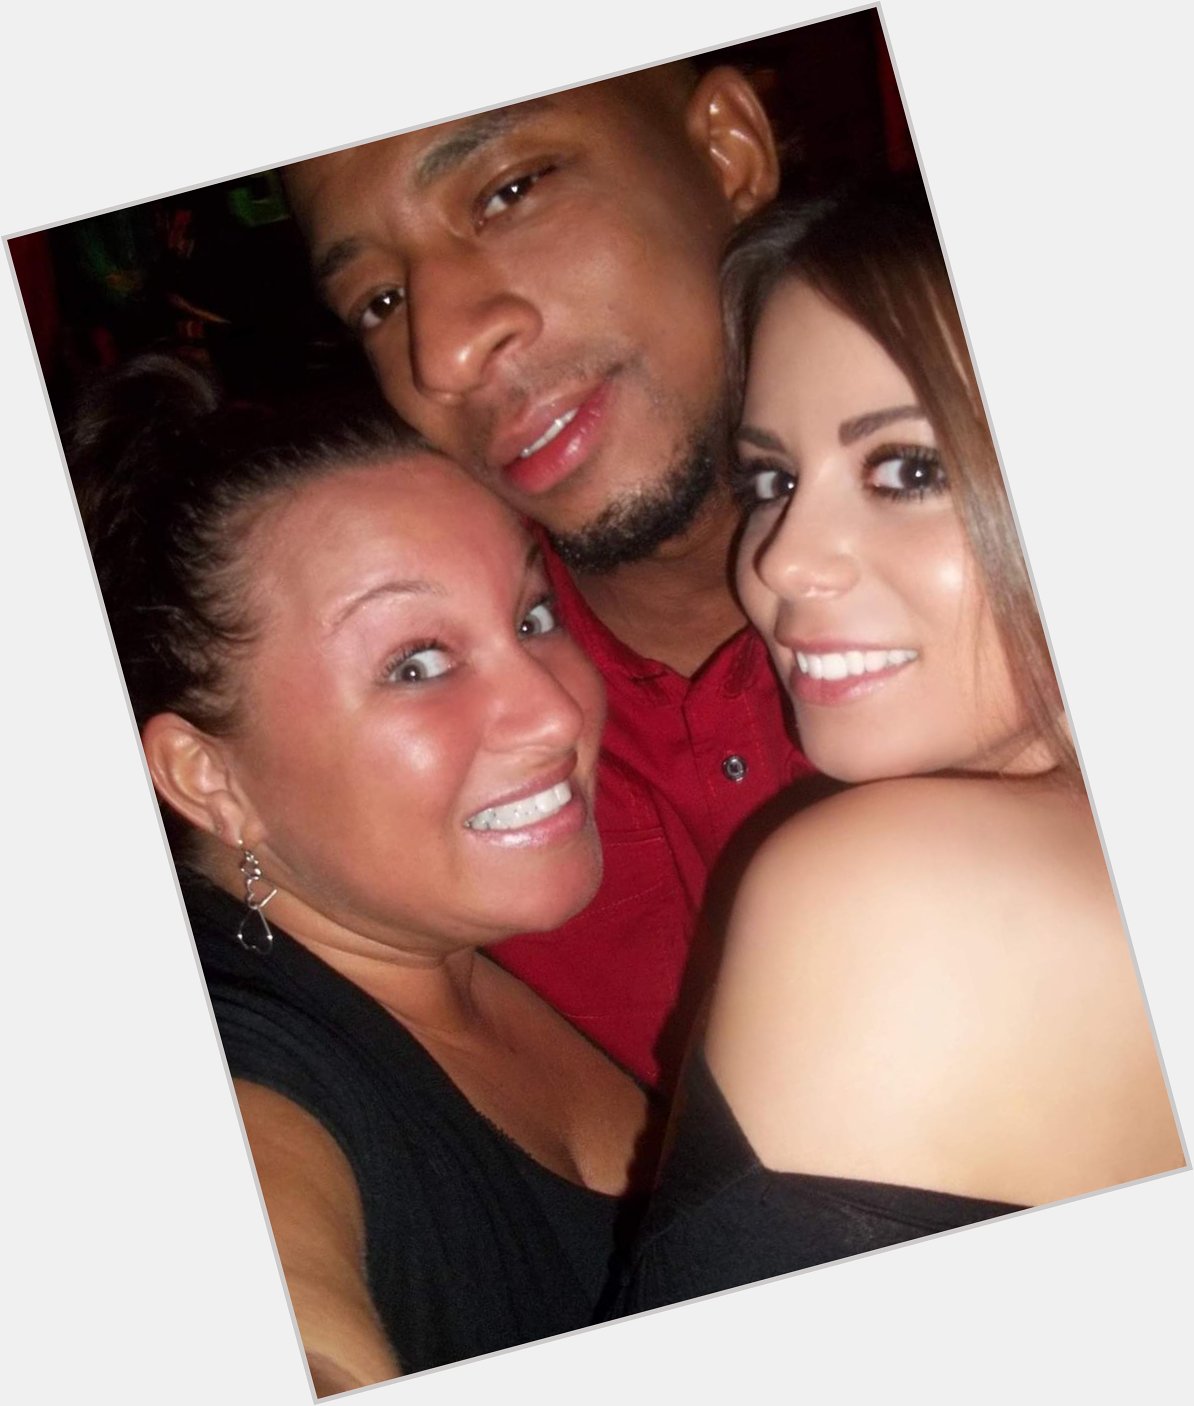 Happy Birthday to the man with the Skills, Antwon Tanner! From all of us at FWB we hope you\re having a great day! 